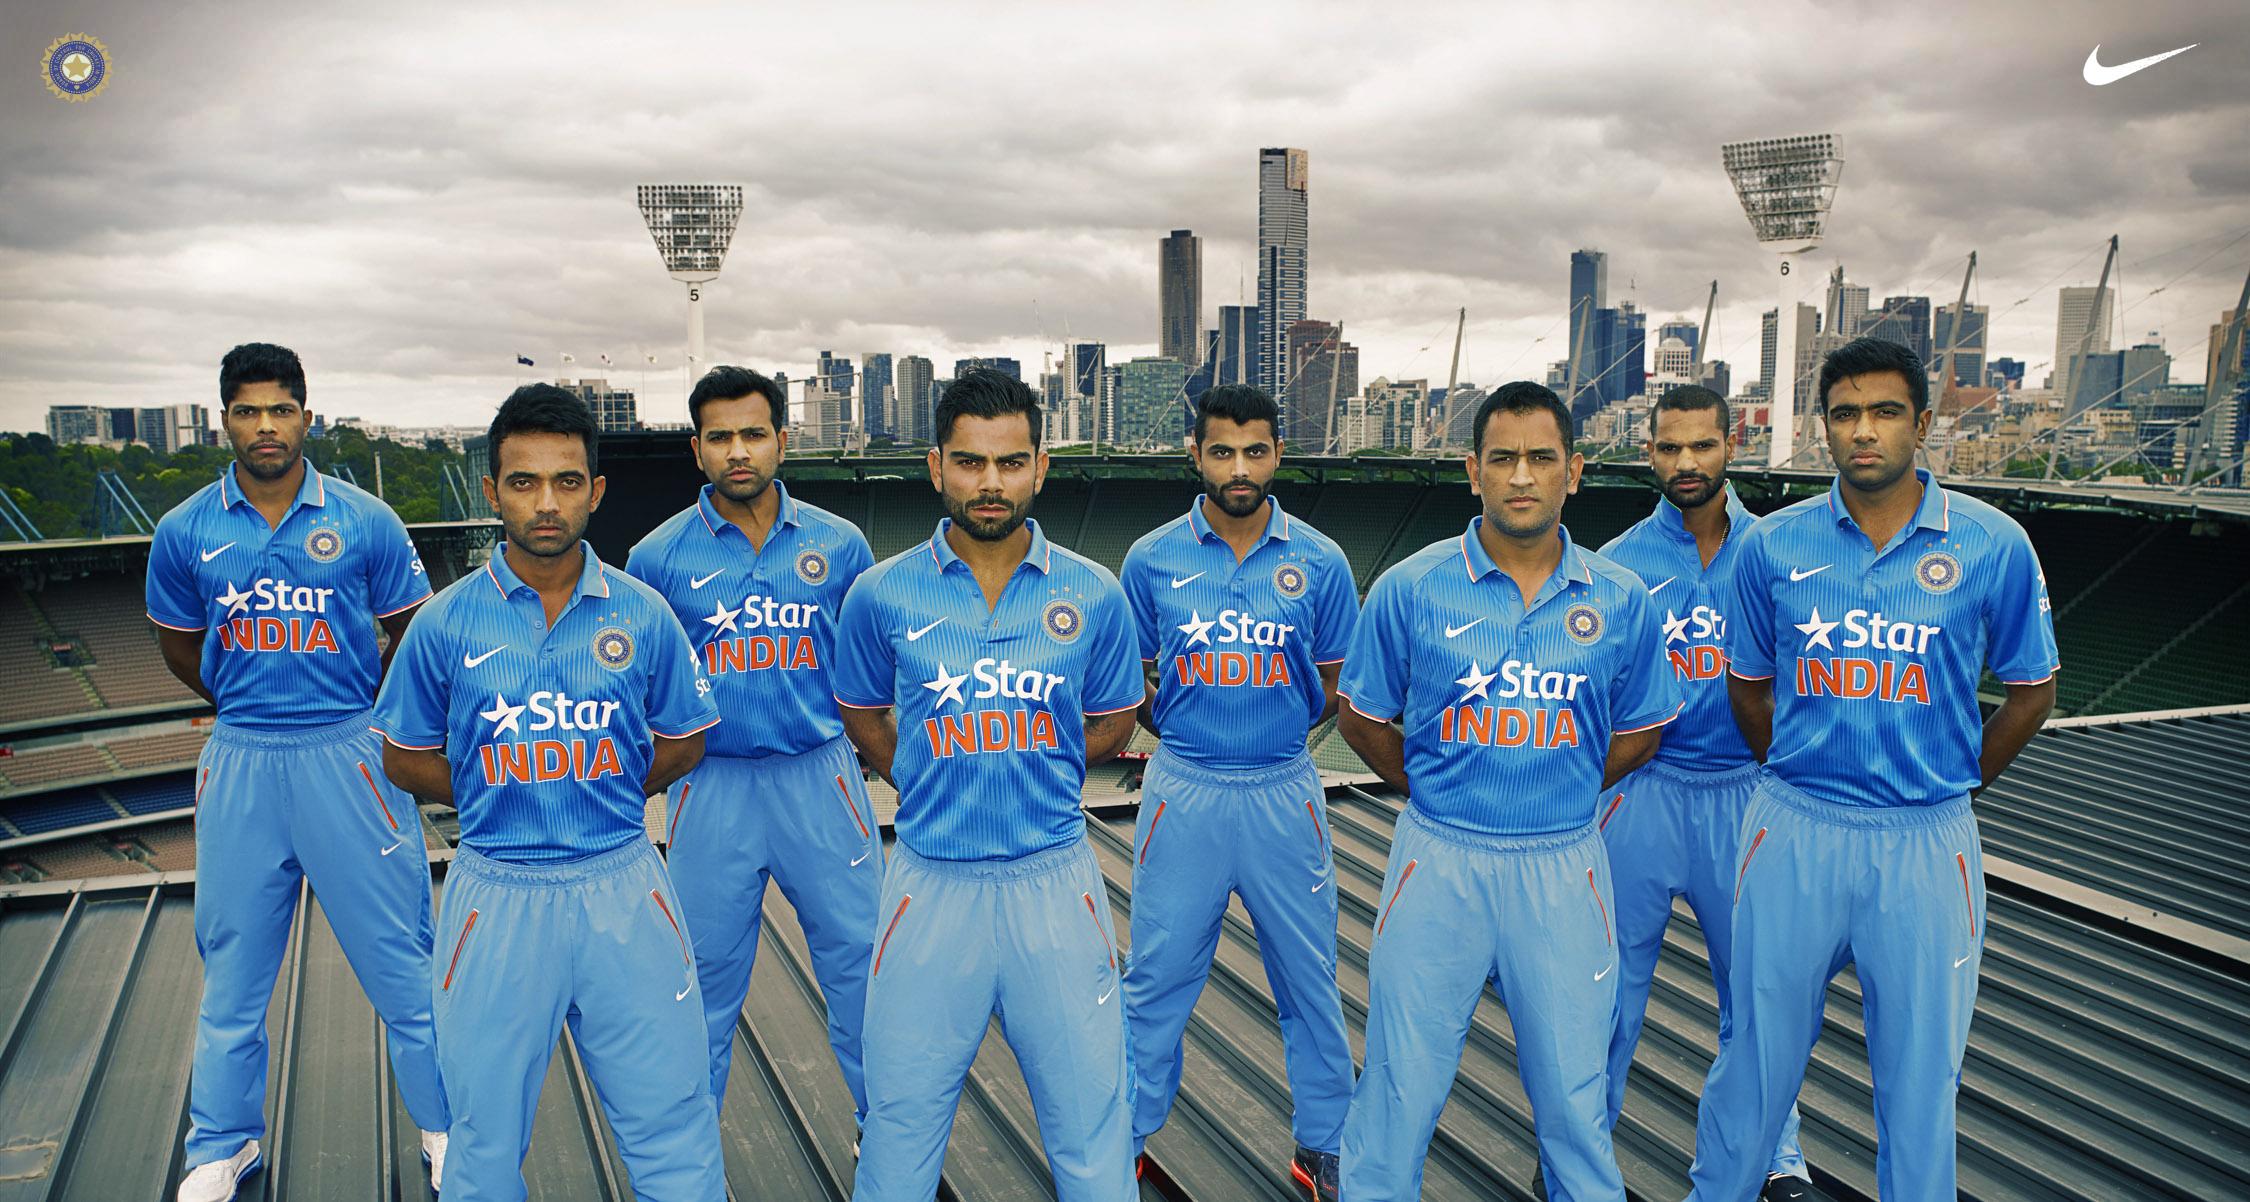 Indian cricket team's new jersey unveiled